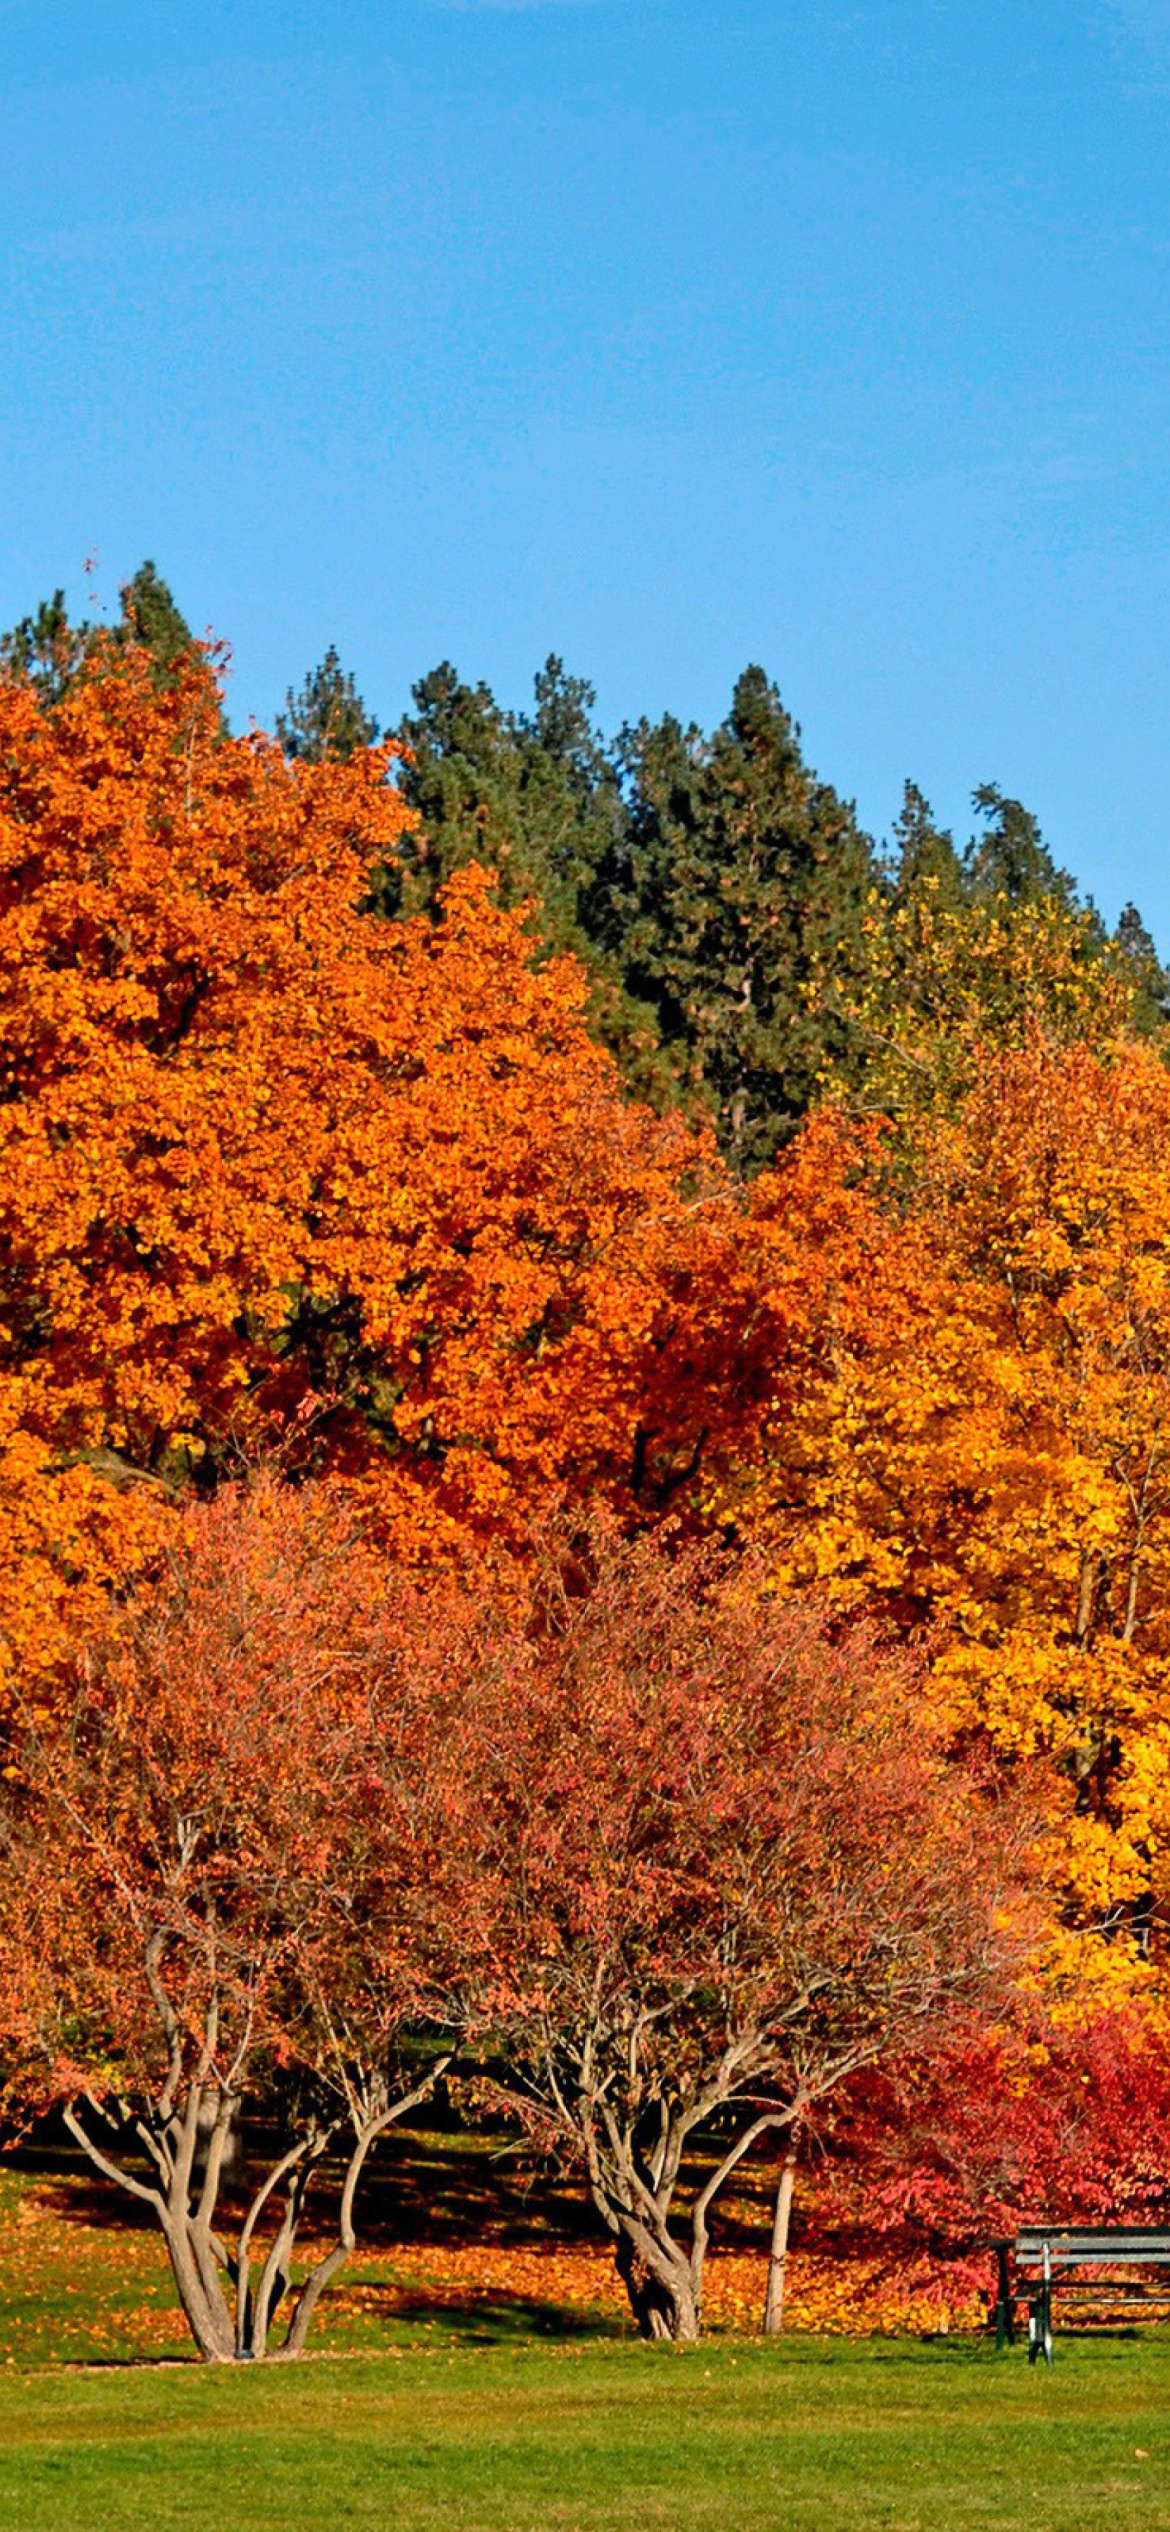 Autumn trees in reserve wallpaper 1170x2532